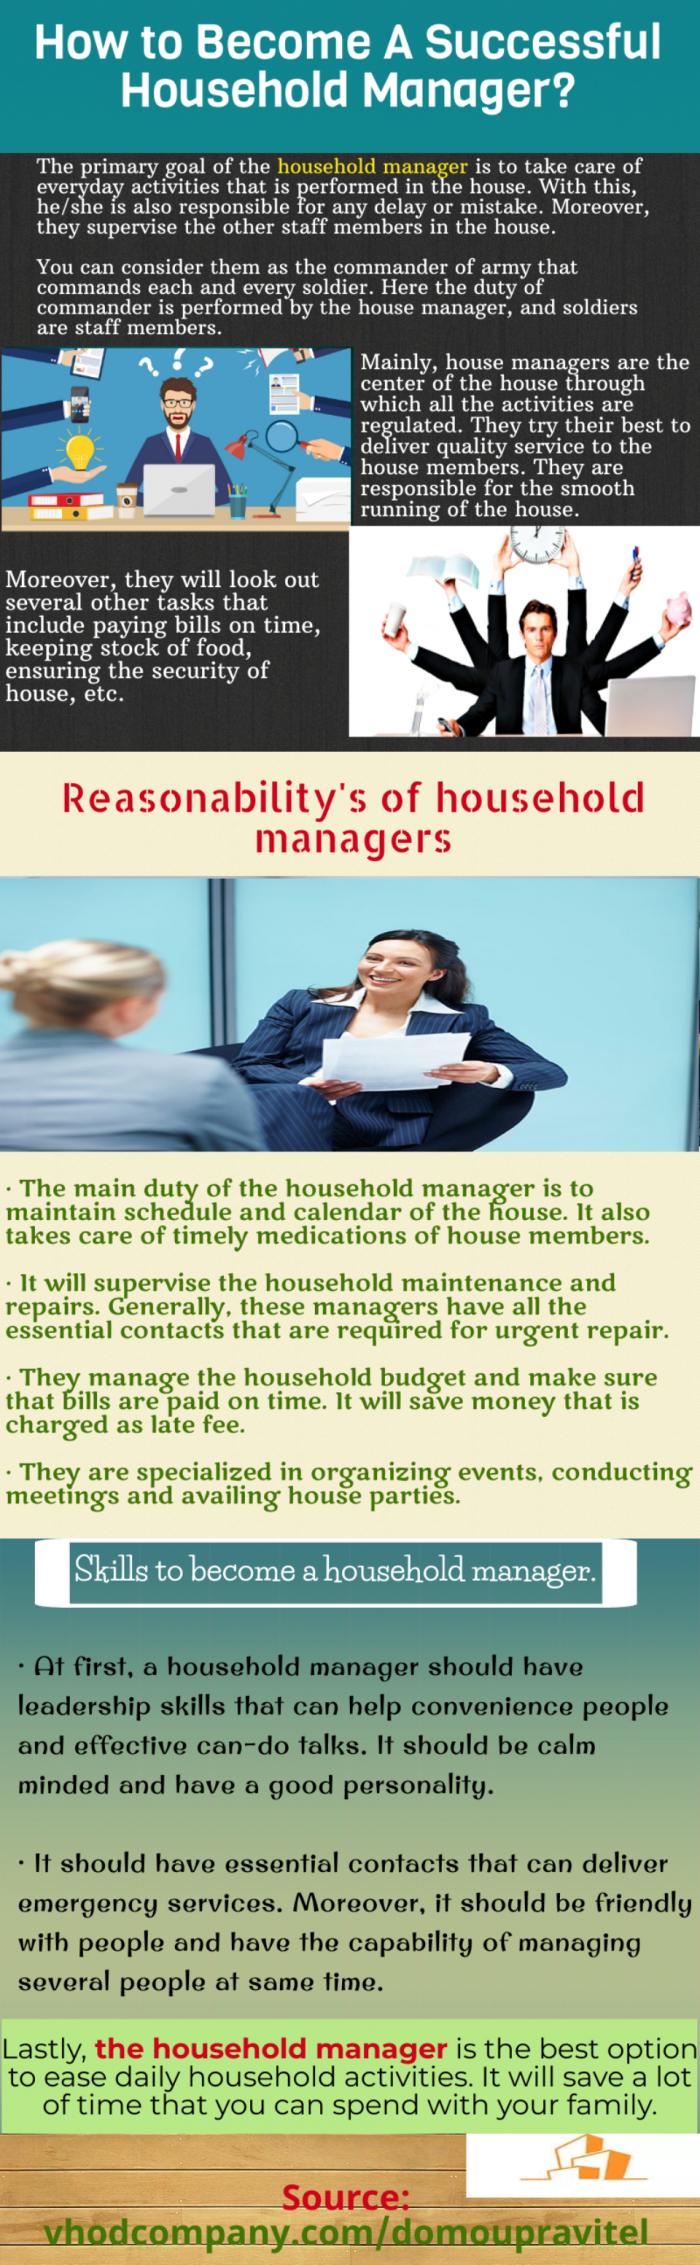 Household manager is the best option to ease daily household activities